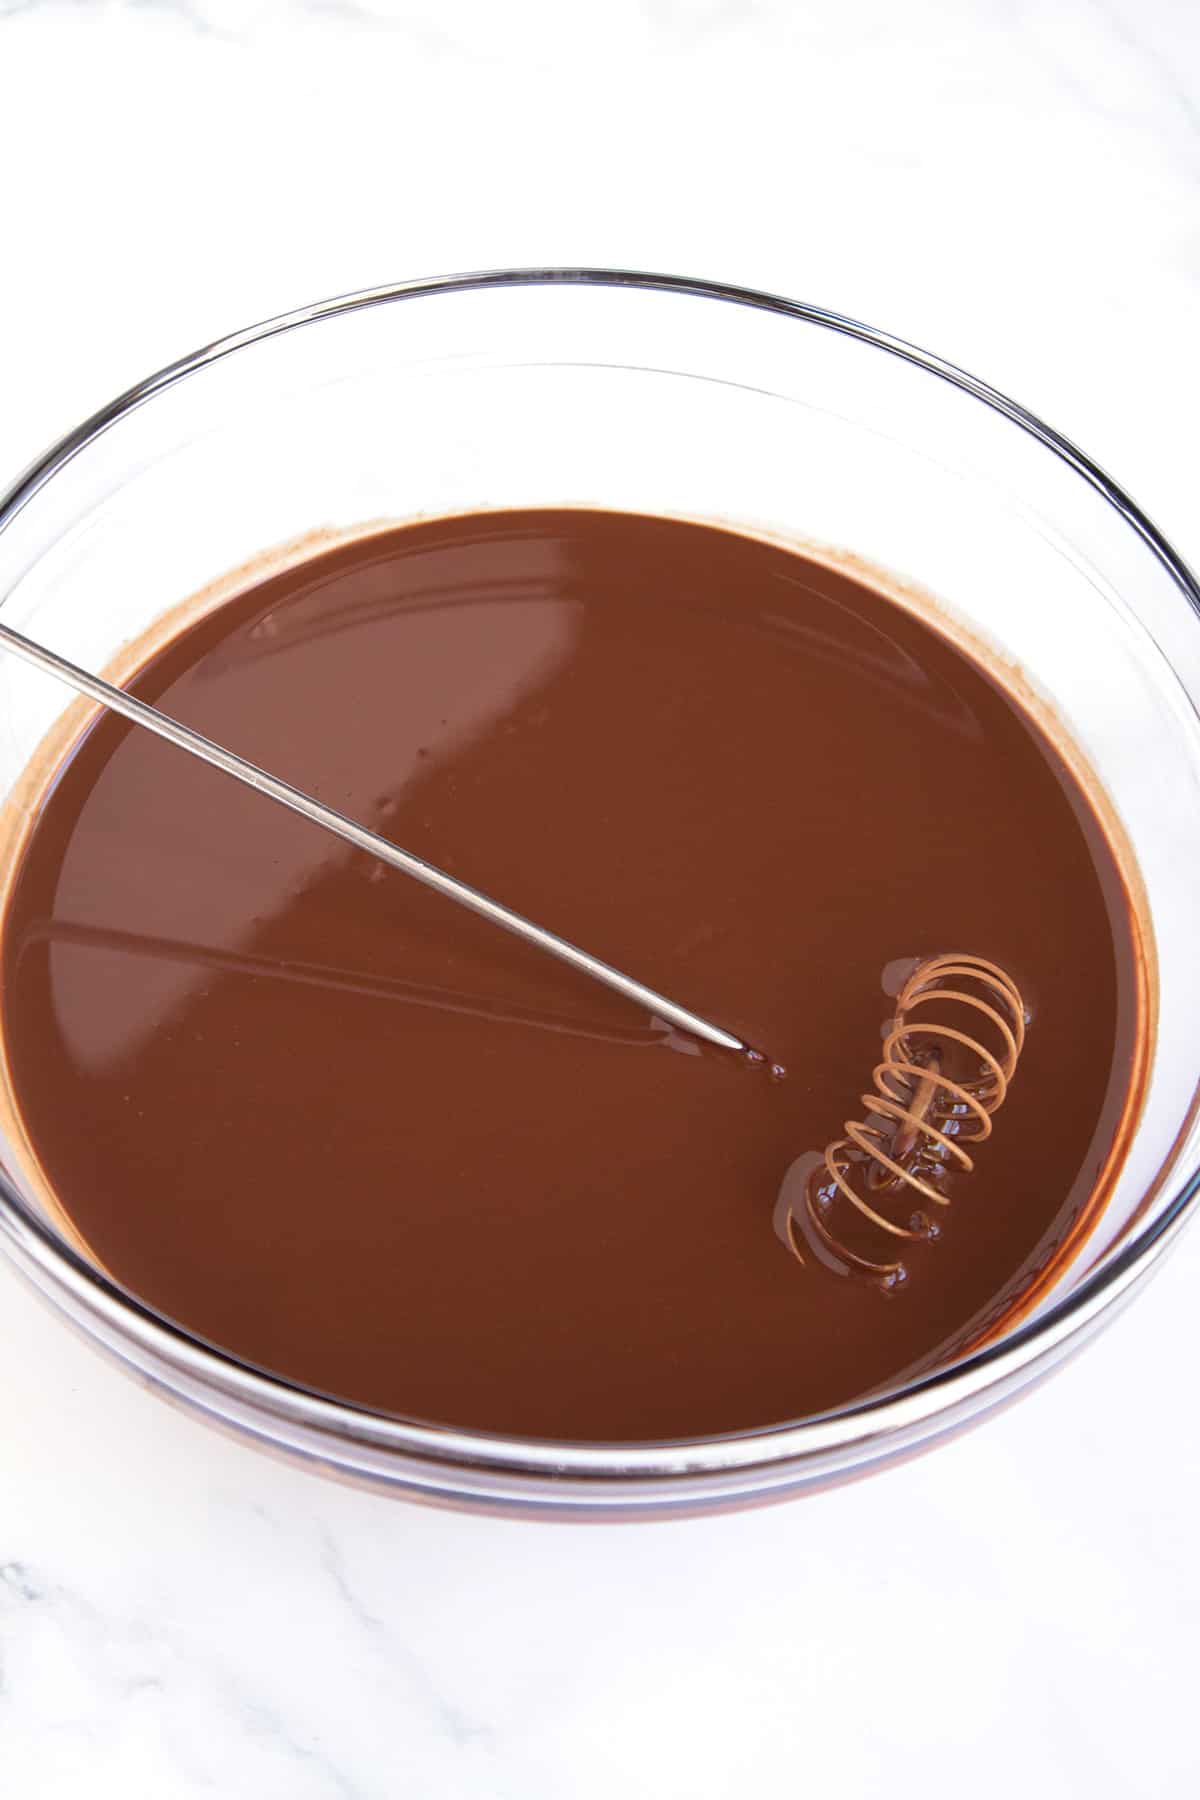 Glass bowl of hot coffee and cocoa powder combined with a whisk resting in the bowl.